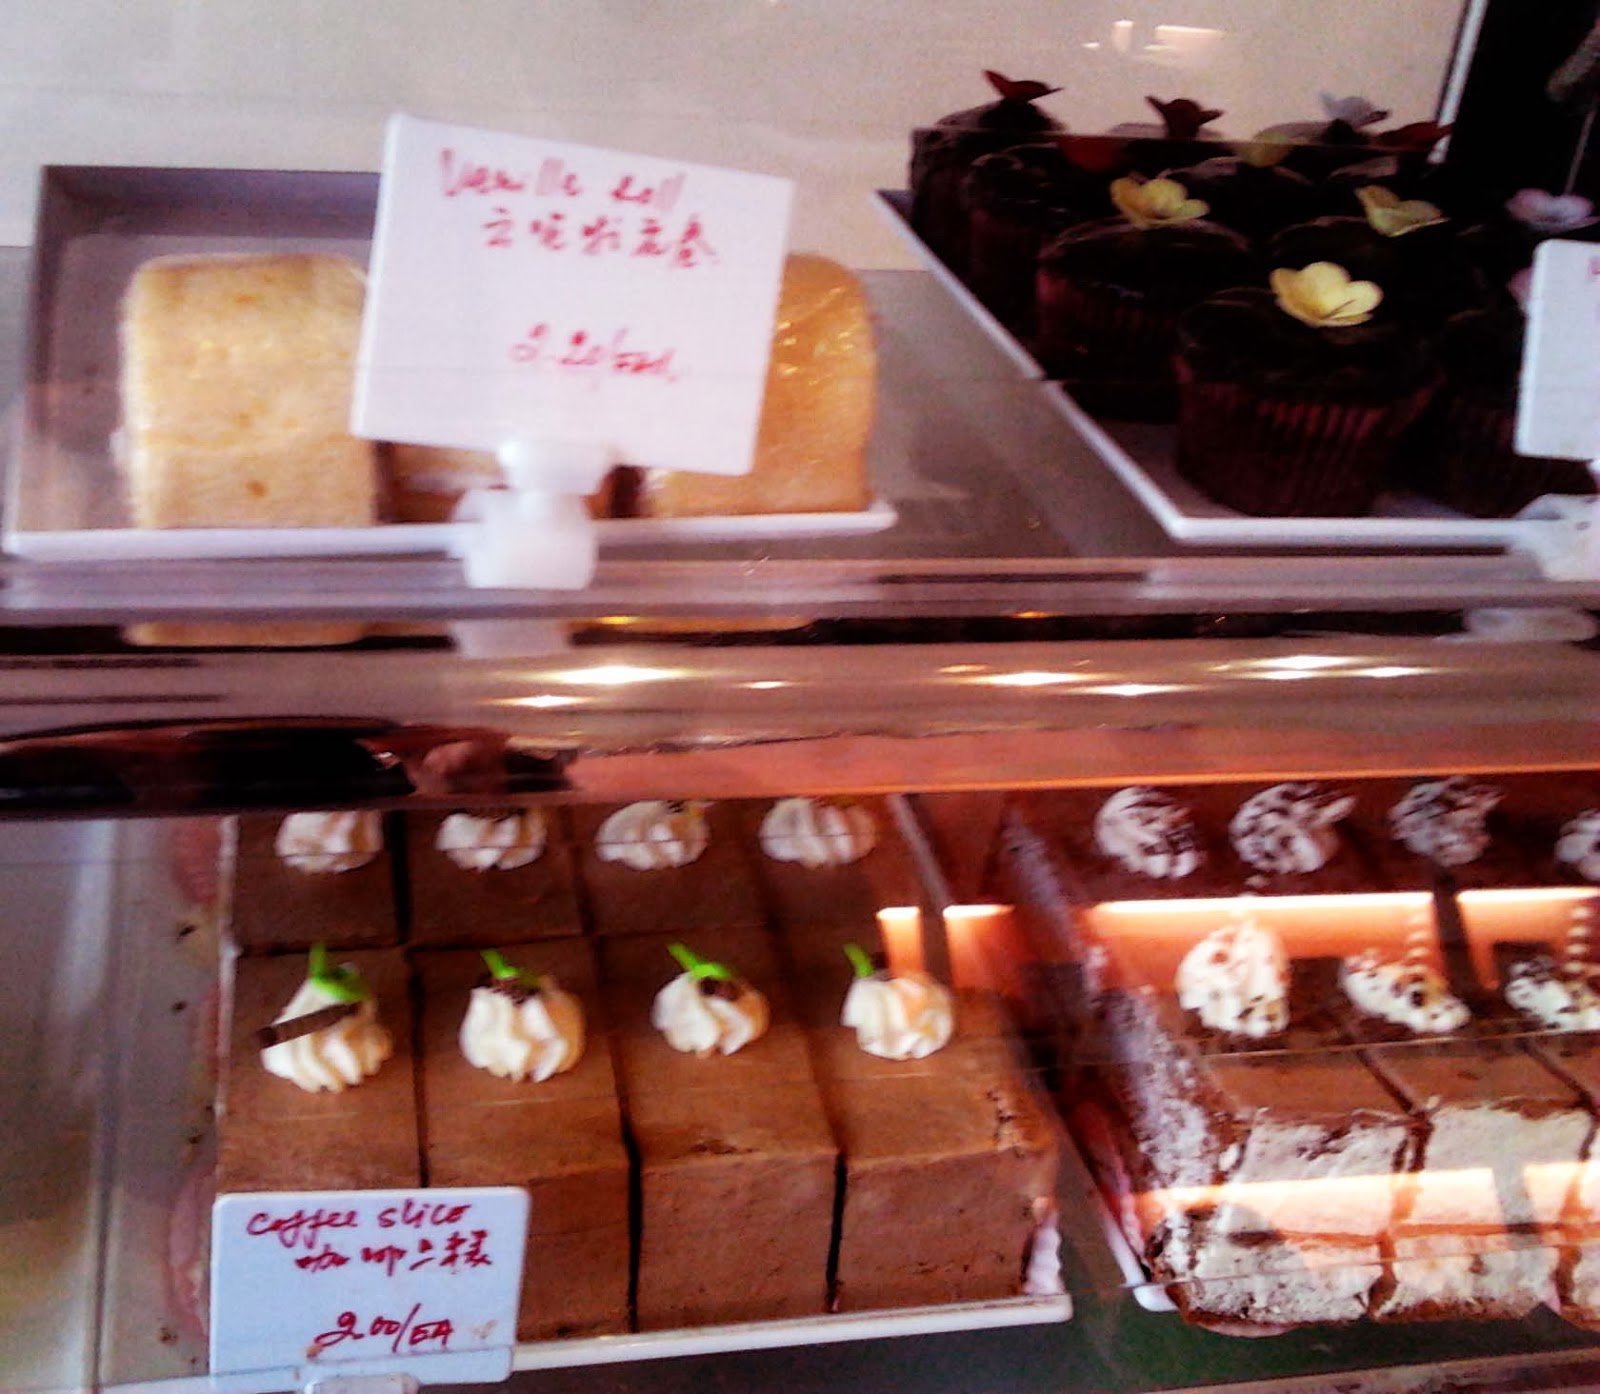 New International Students: Victoria Cake shop in Footscray by Katherine